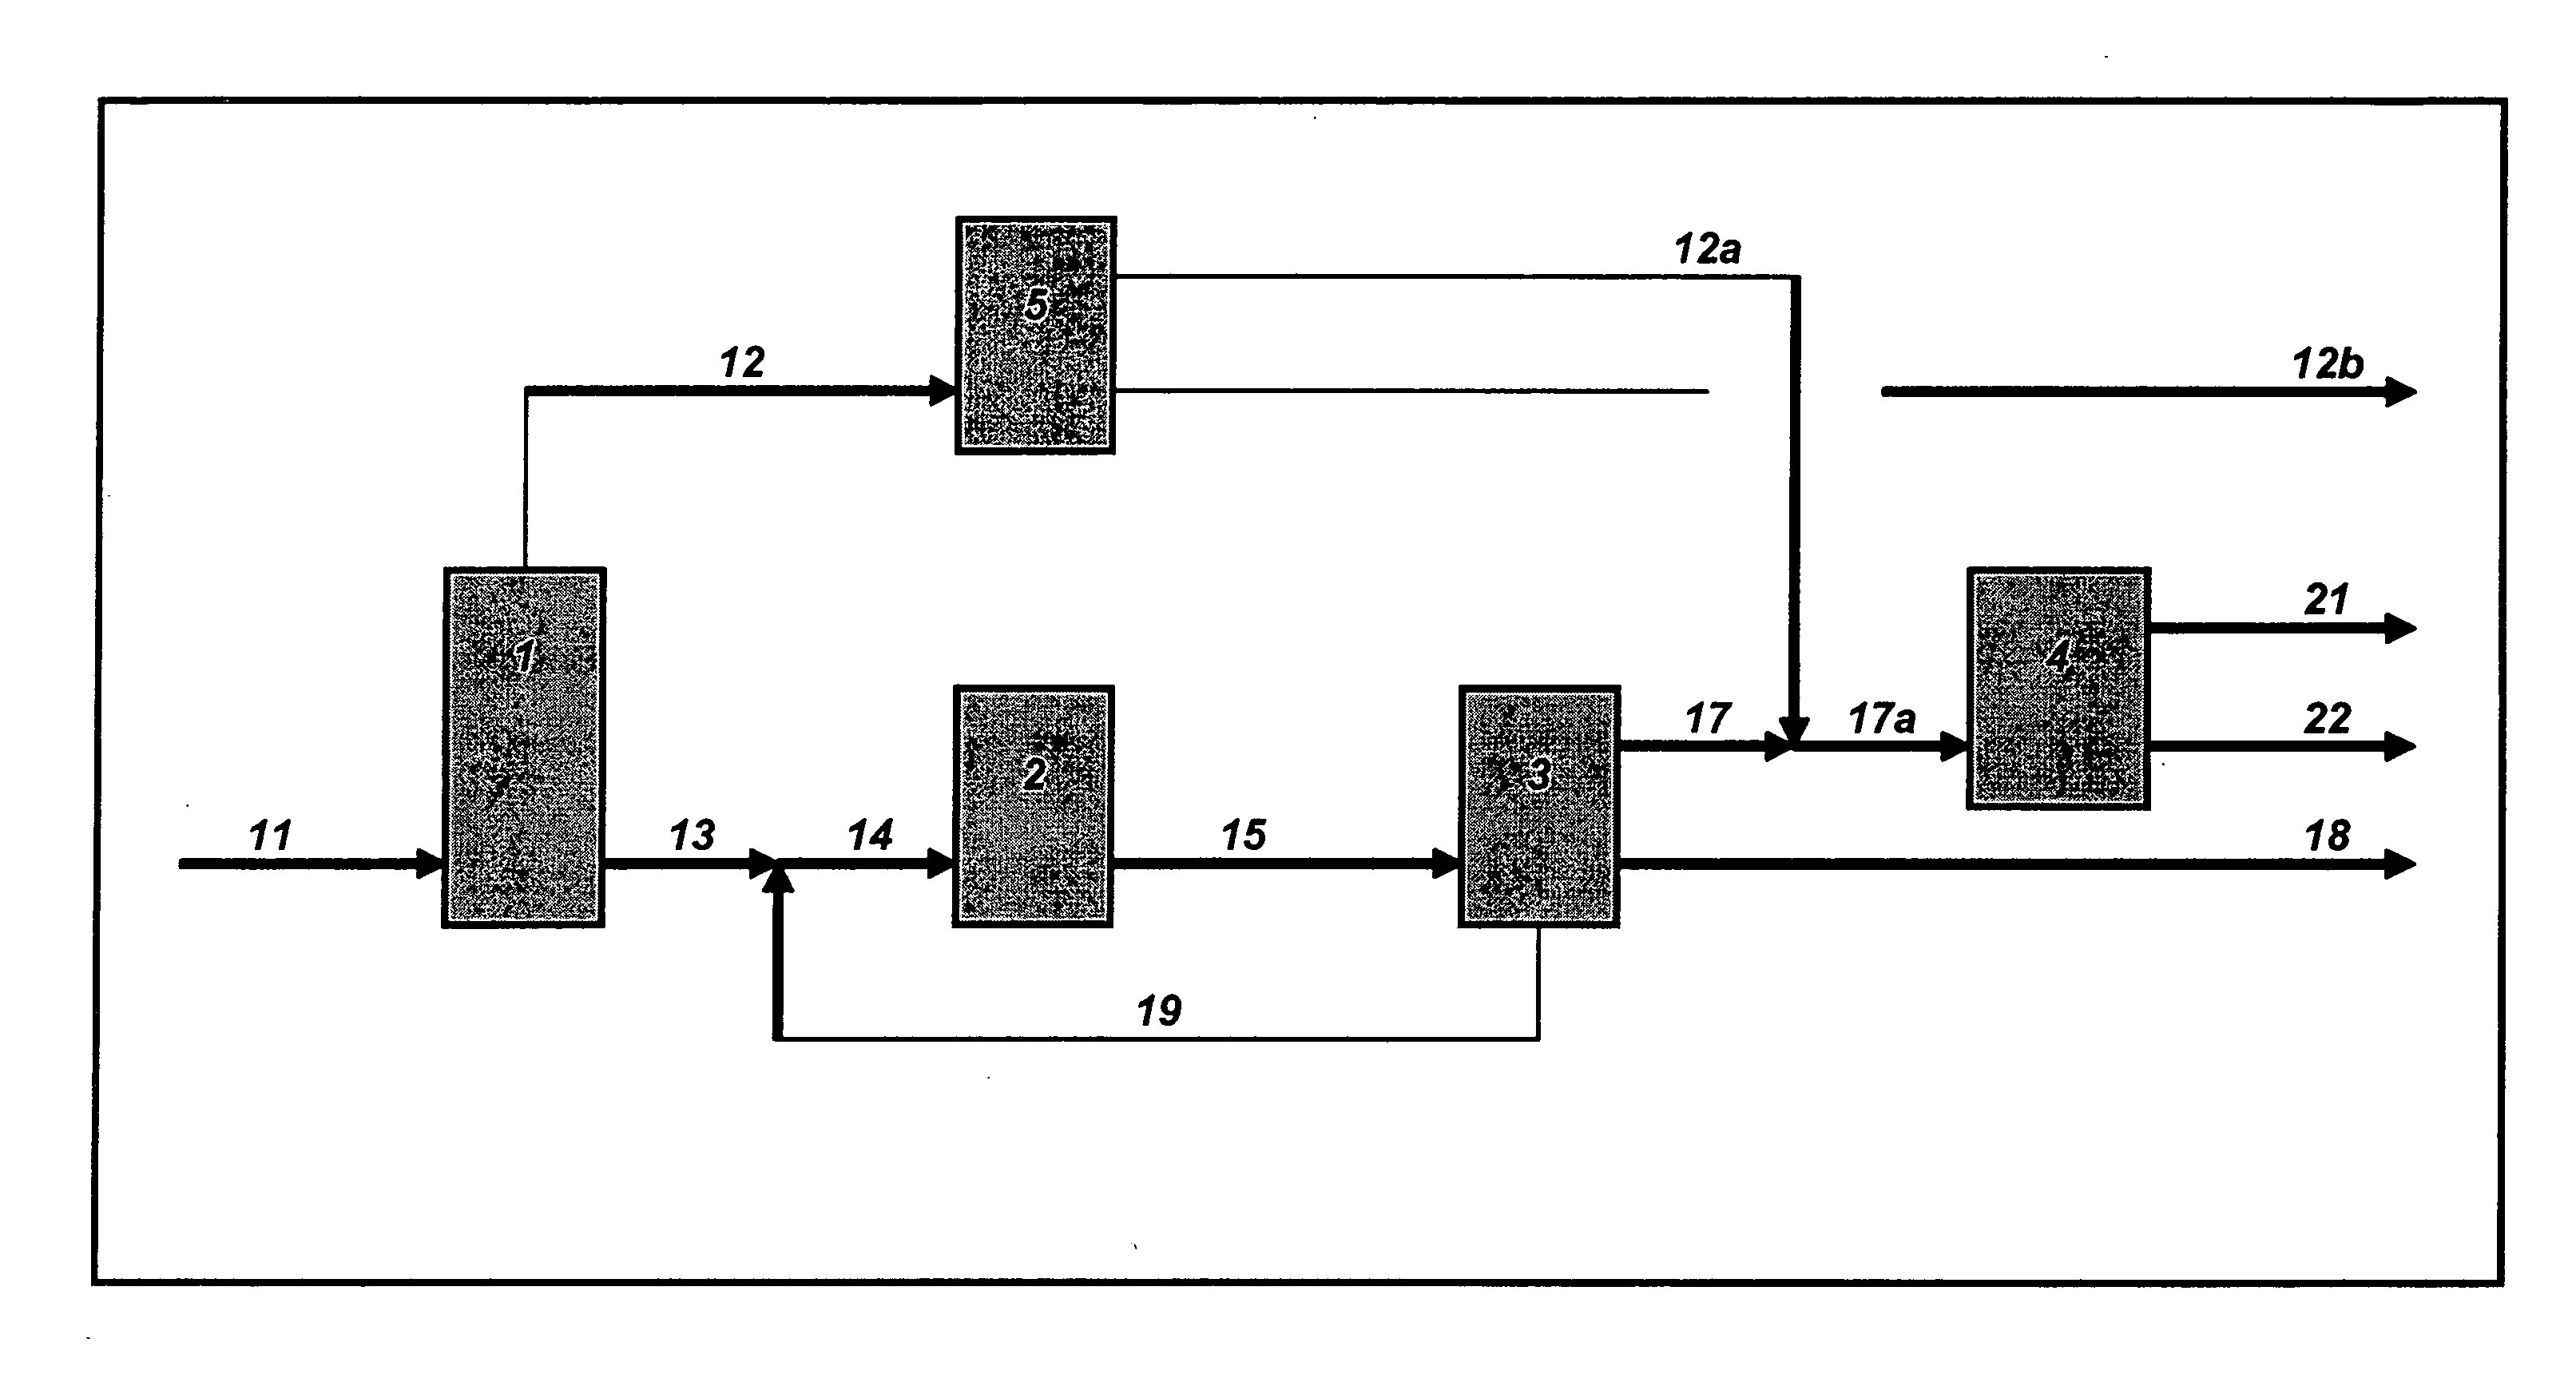 Process for the preparation of and composition of a feedstock usable for the preparation of lower olefins